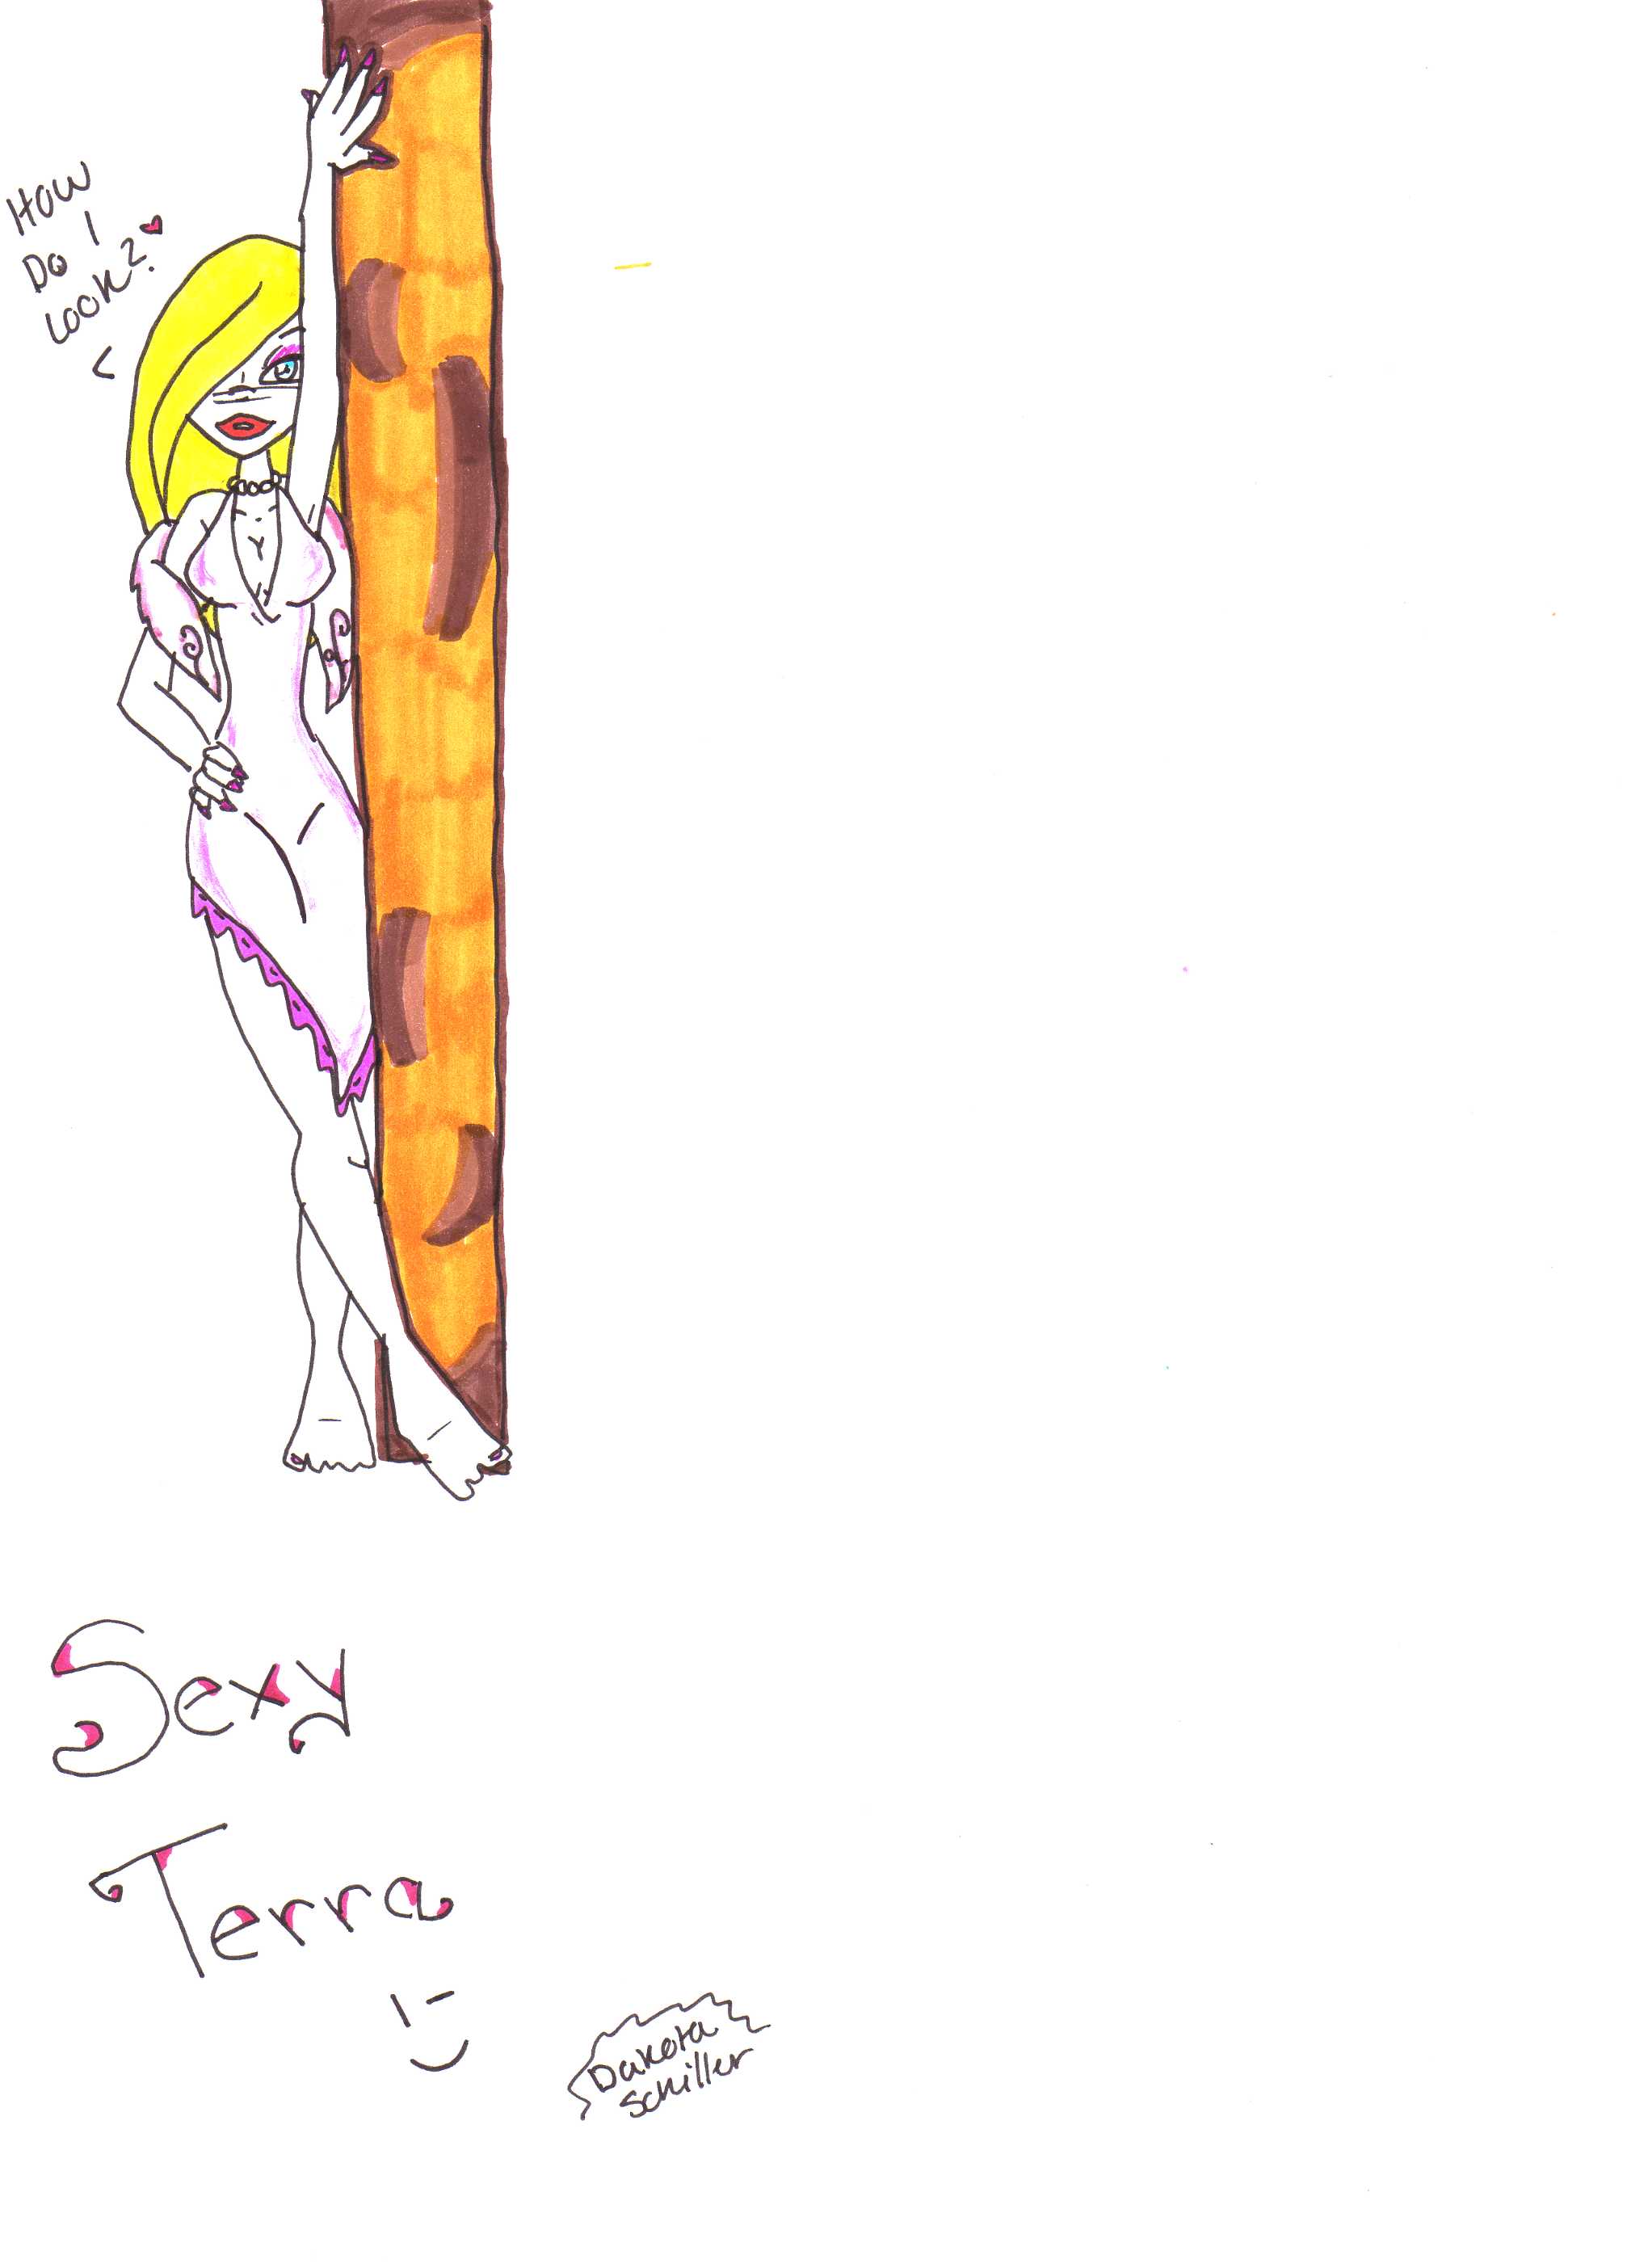 ~Sex-a Terra~ by violetflowers17